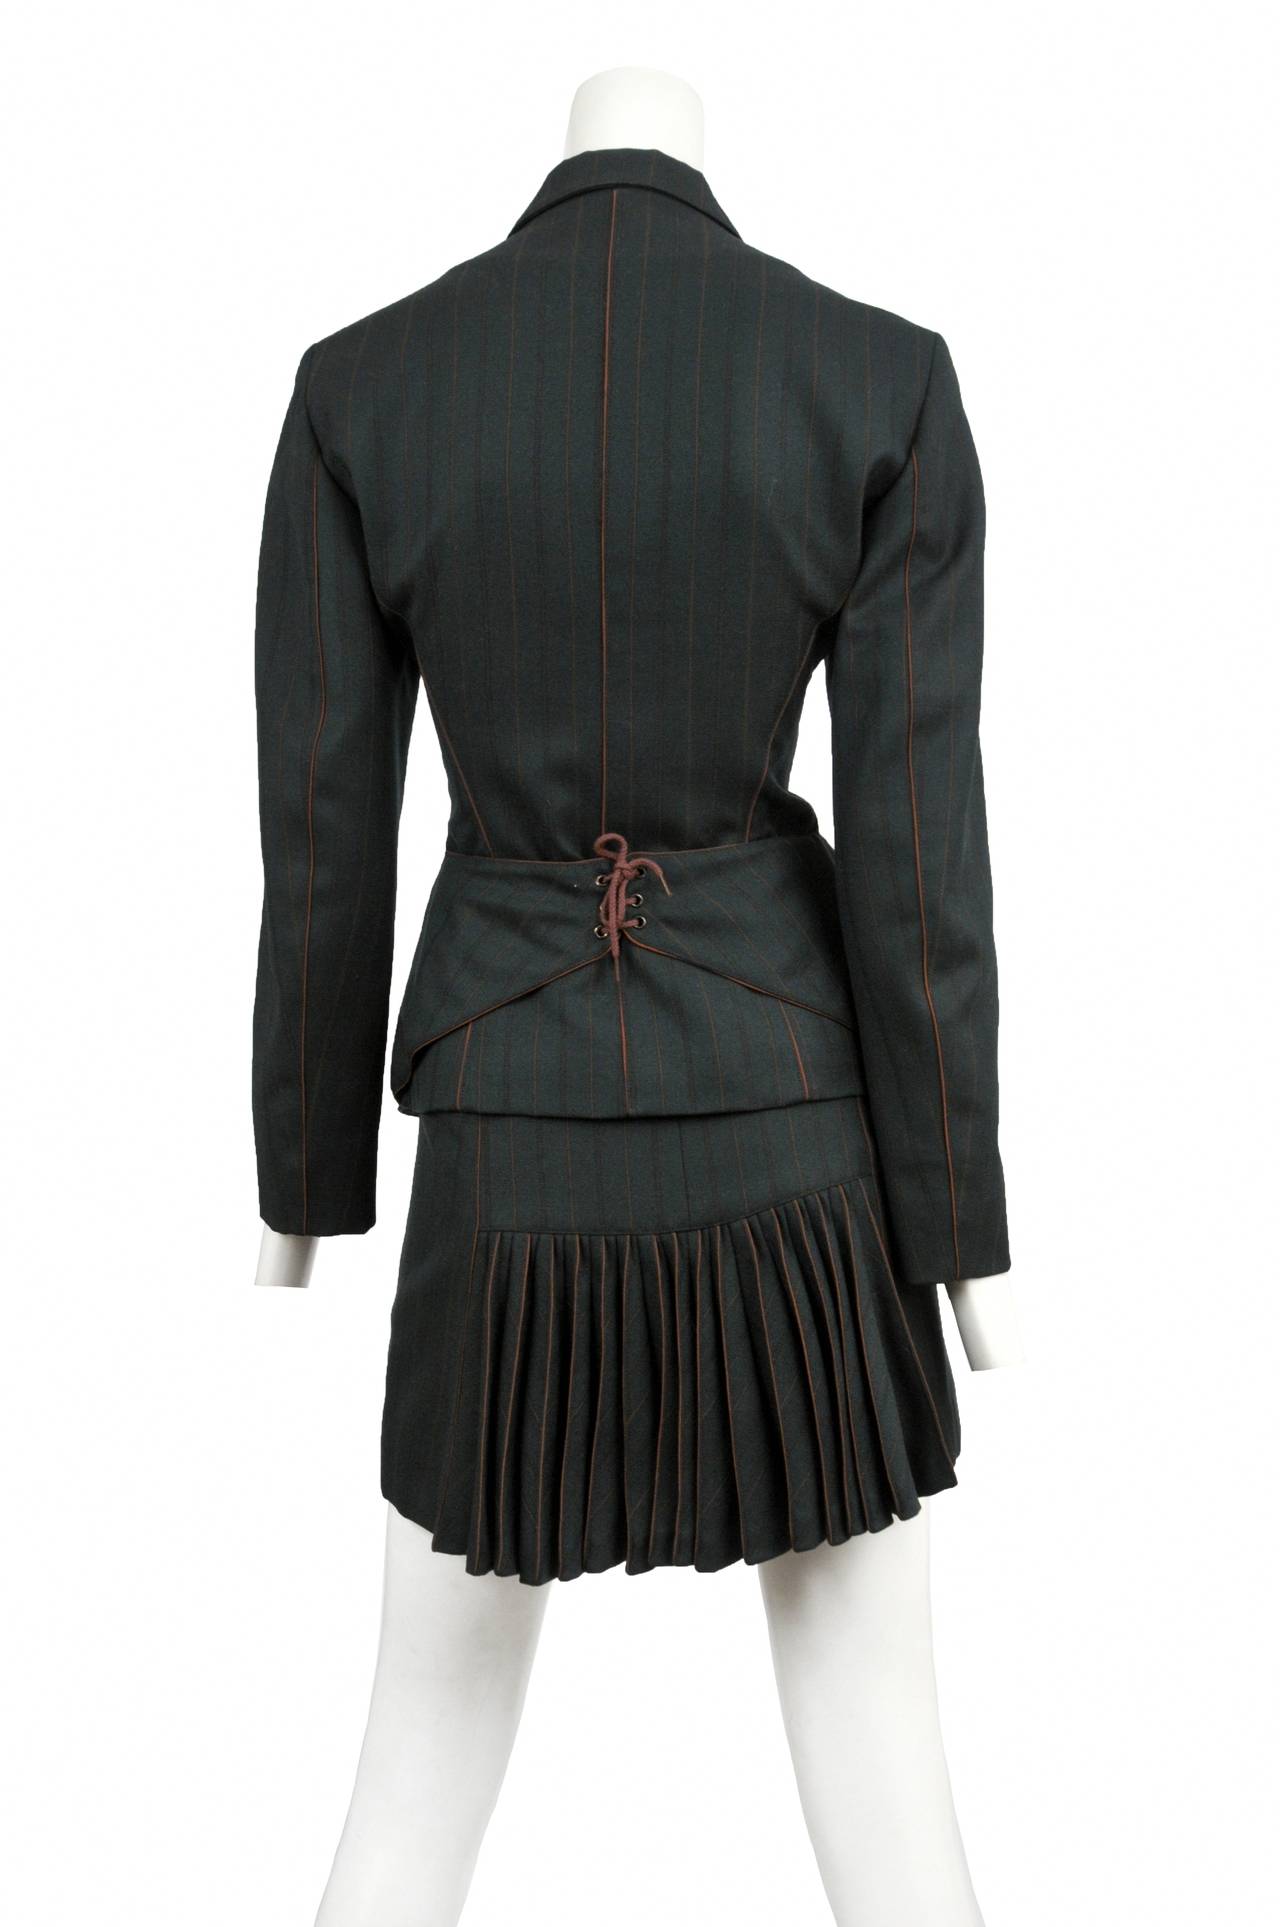 Vintage Azzedine Alaia woven rayon dark green pinstripe two piece suit. Corset seam detailing shape the curves of the waist line with a flirty accordion pleat inset at the back of the skirt.